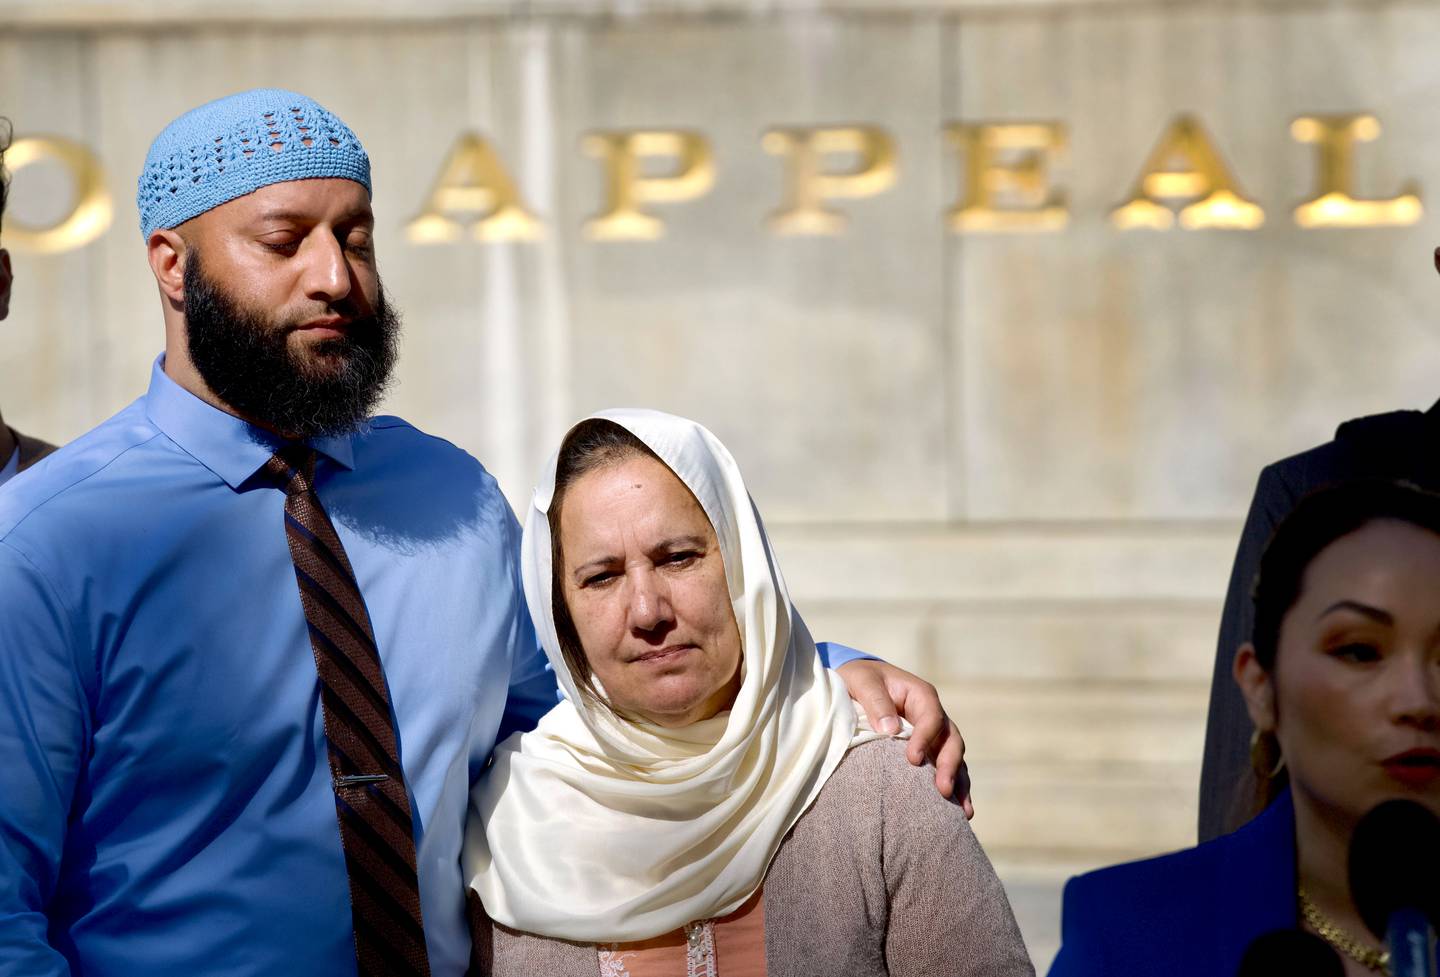 Adnan Syed and mother Shamim Syed  speak to the press after the Maryland Supreme Court hearing on Thursday to hear oral argument in the Adnan Syed case.